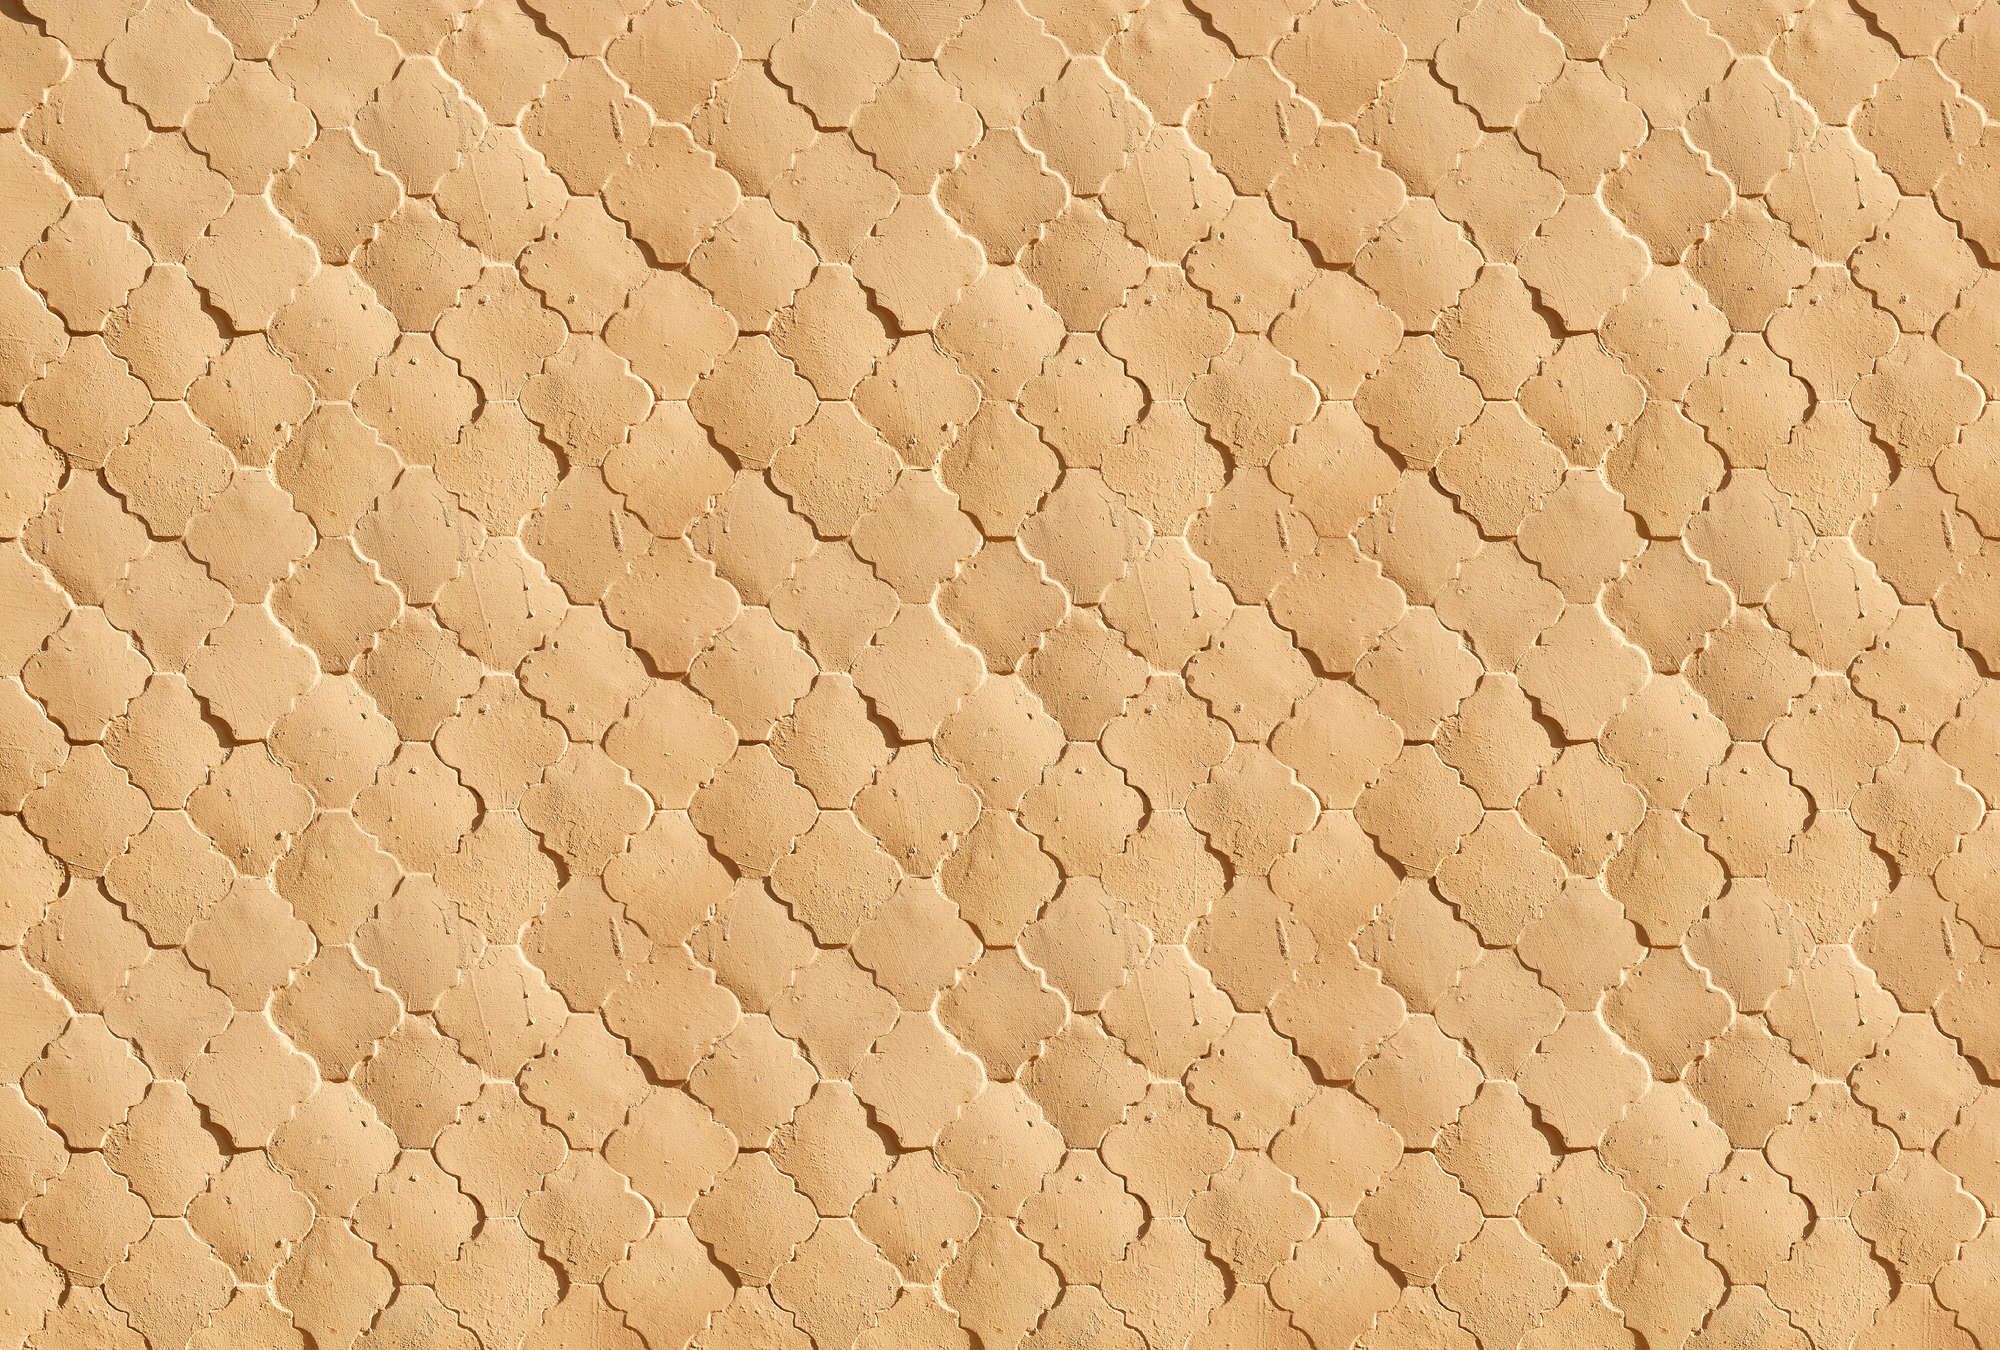             Photo wallpaper »siena« - Mediterranean tile pattern in sand colours - Smooth, slightly pearly shimmering non-woven fabric
        